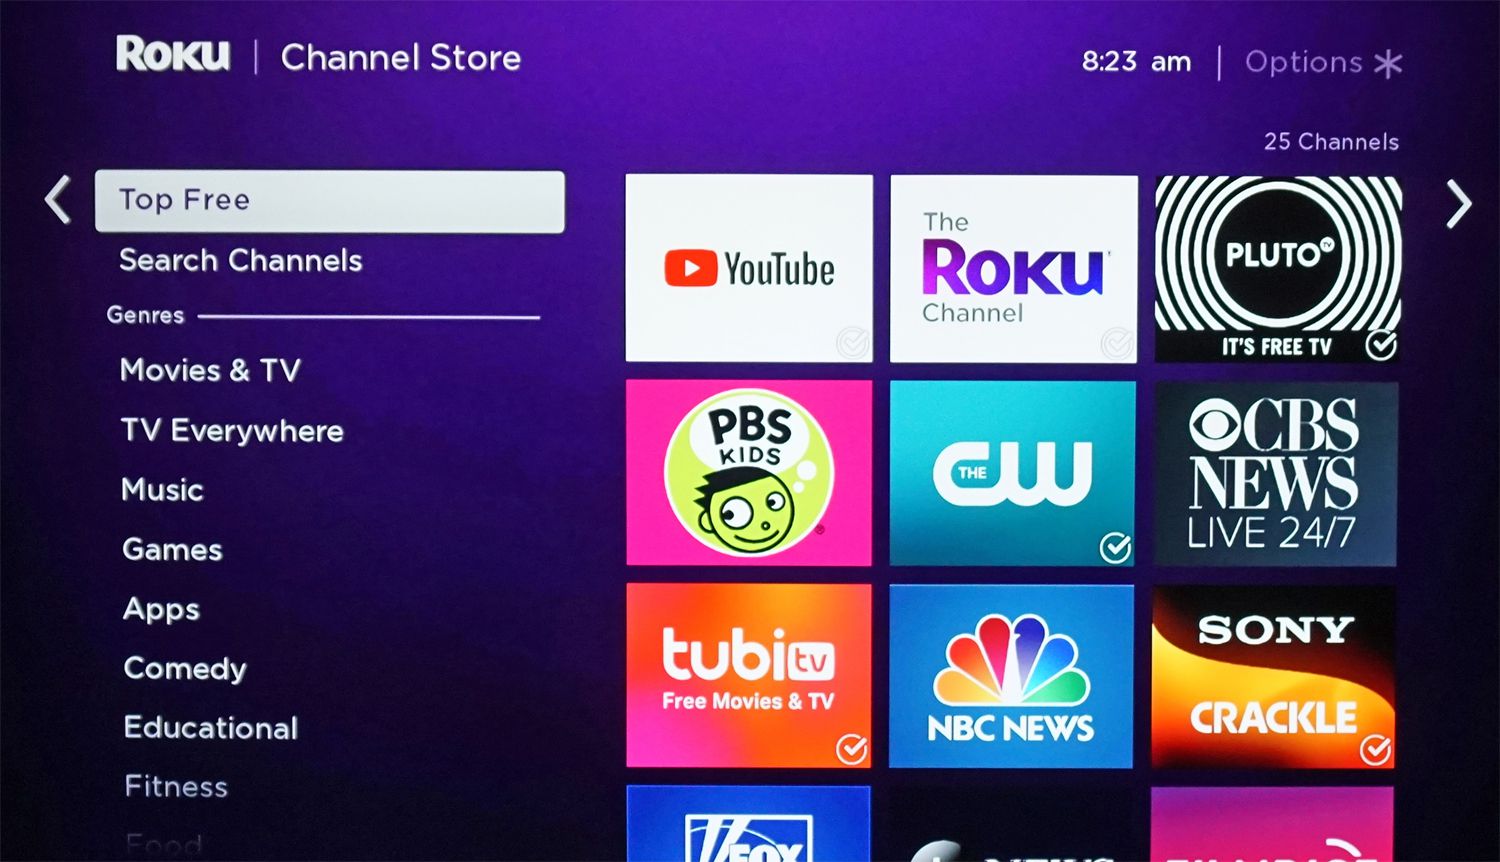 fix roku You can rewind and fast forward after the break issue